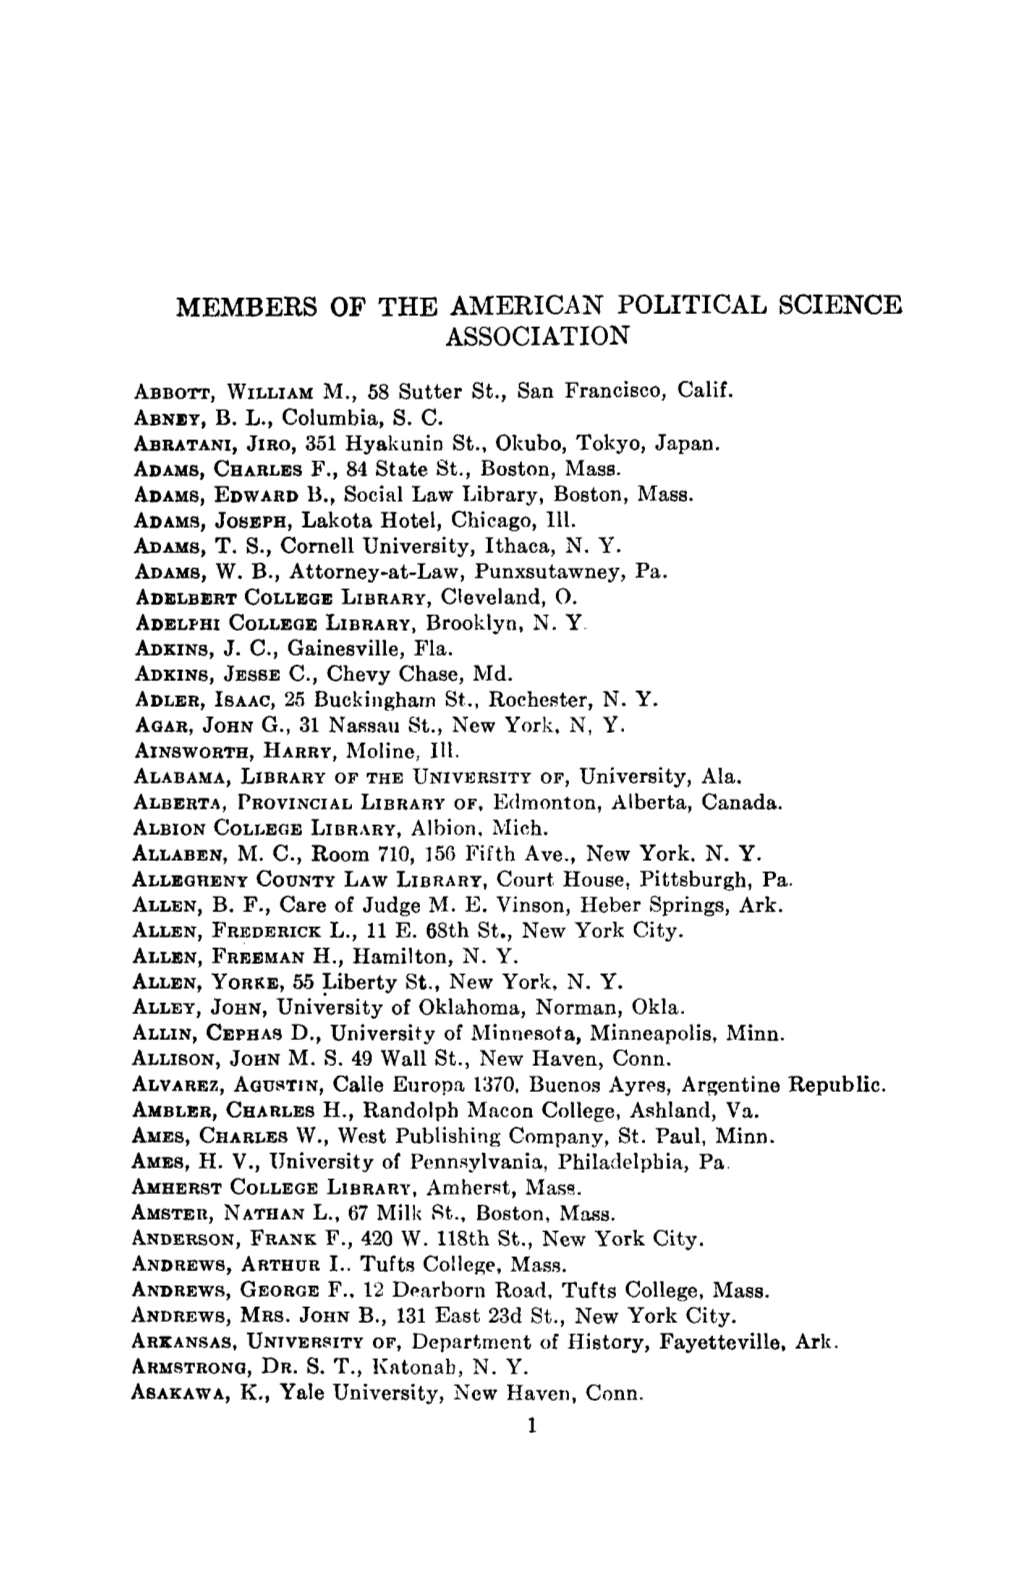 Members of the American Political Science Association